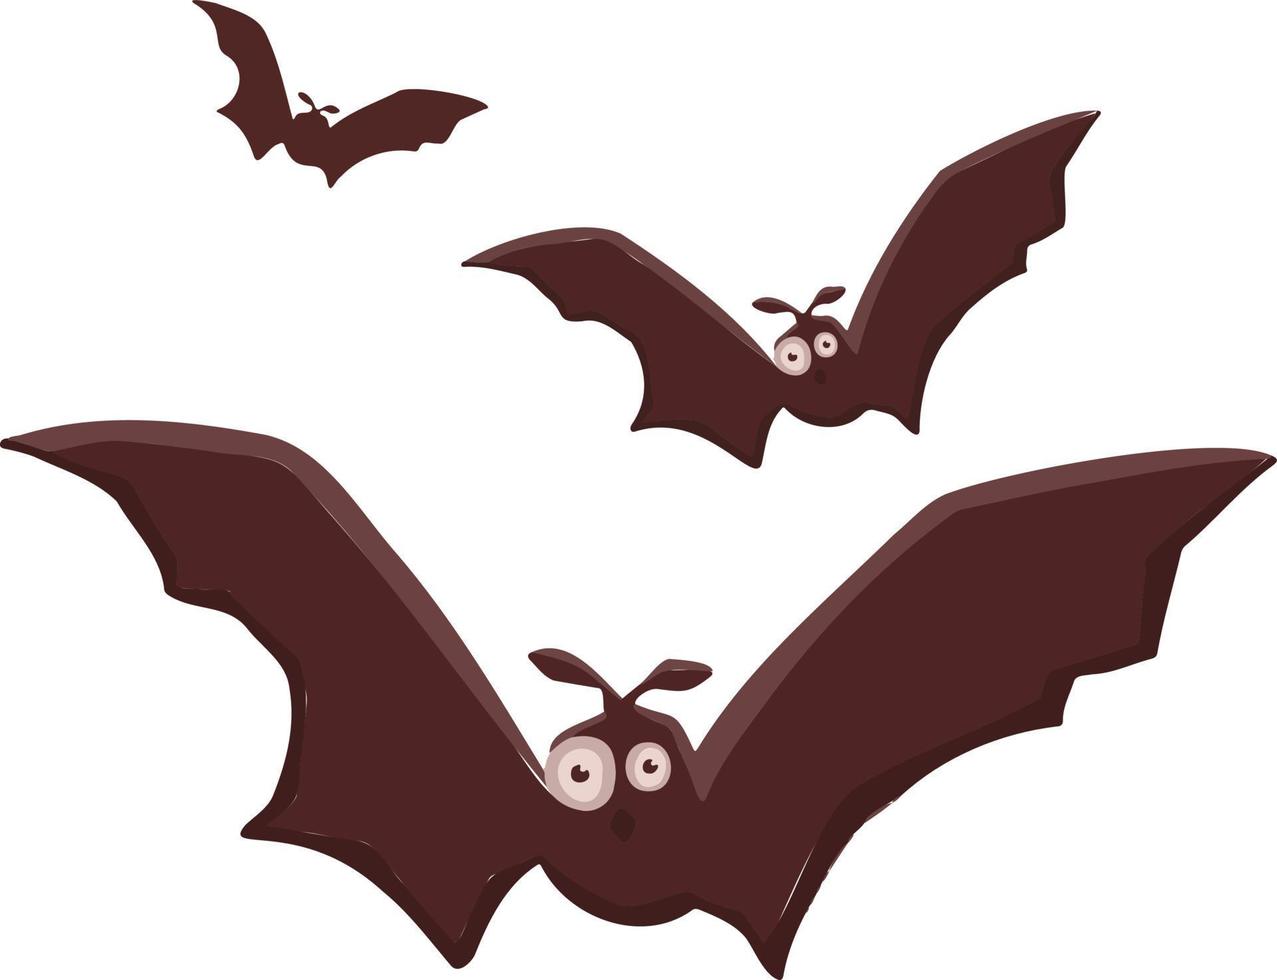 Bats flock for halloween and horror movie vector